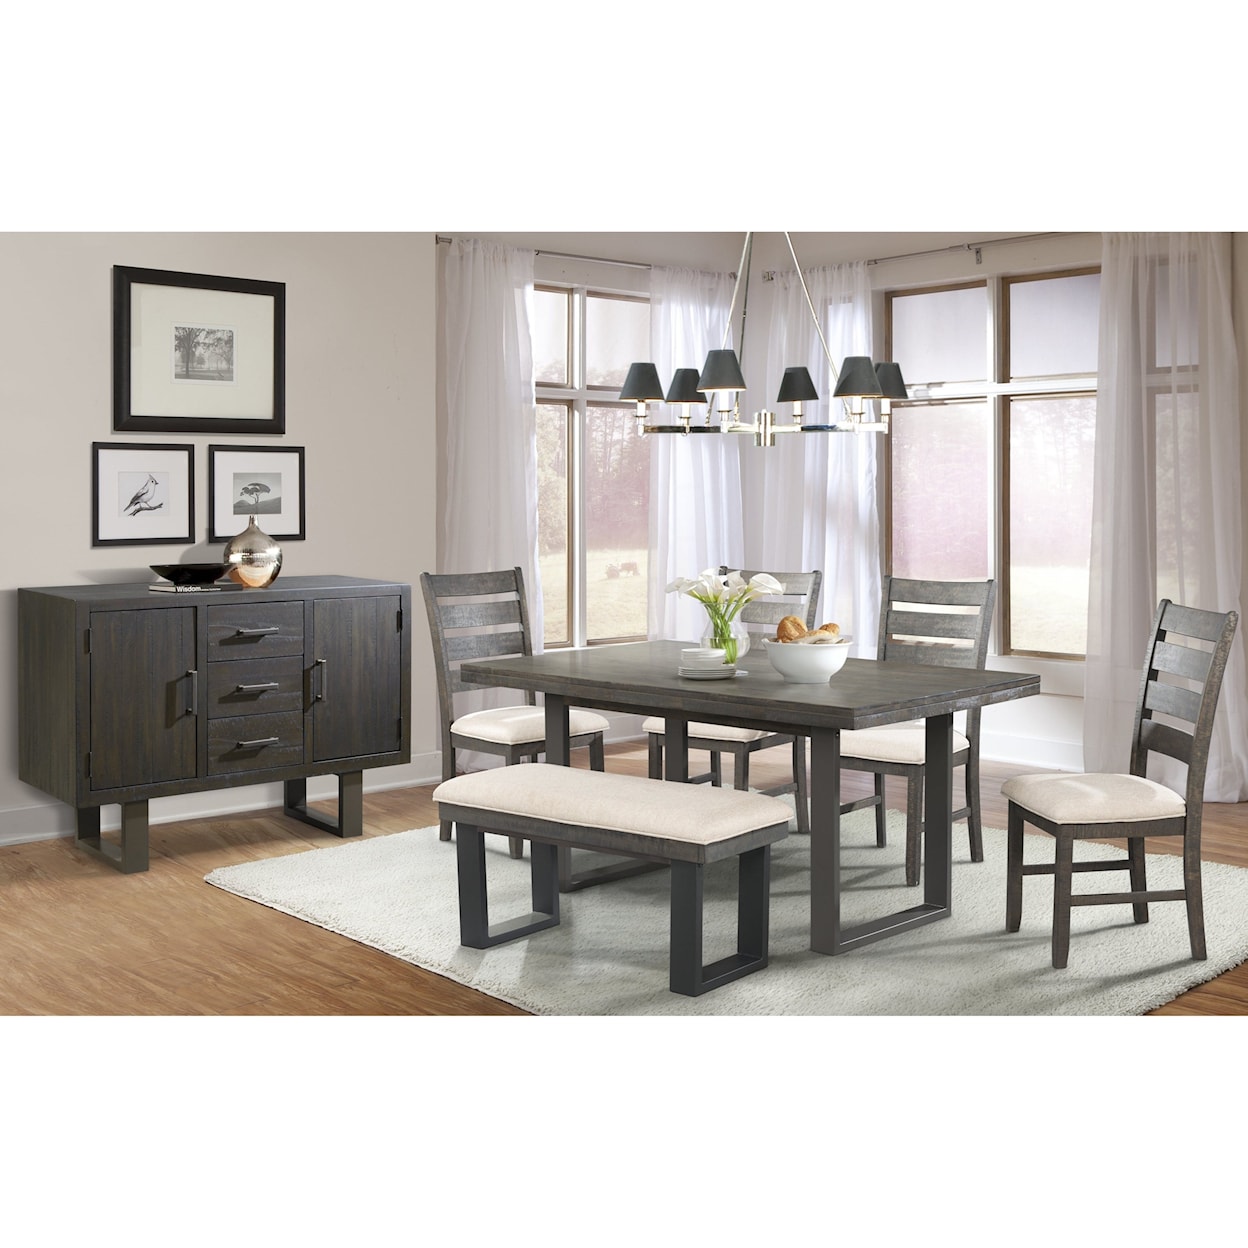 Elements Sawyer Dining Table Set with Bench